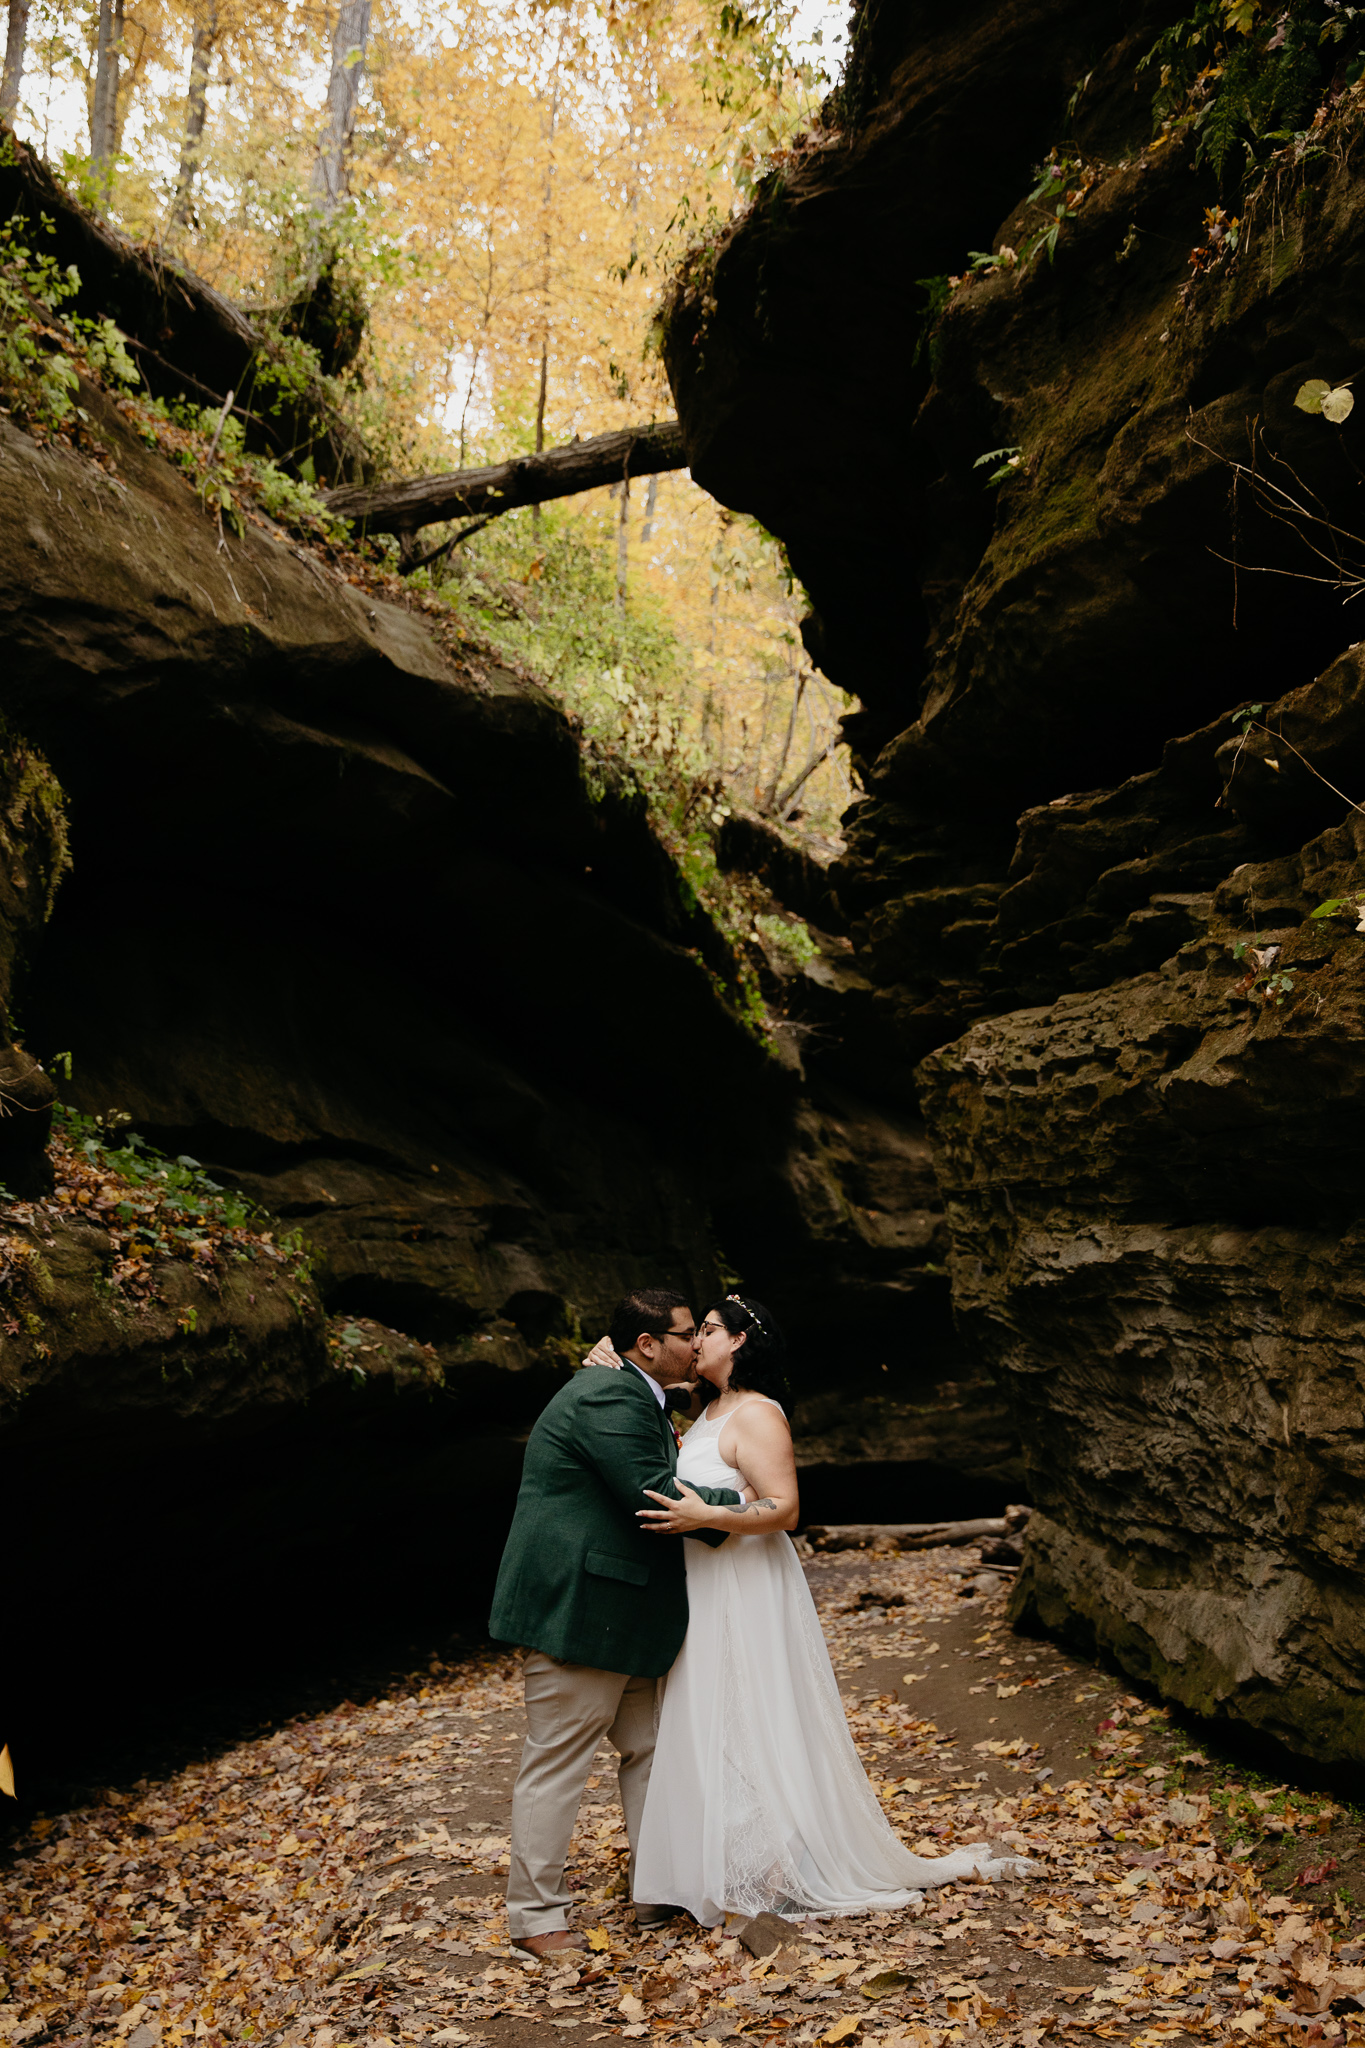 Ope! 7 Best Places to Elope in the Midwest - Turkey Run, Indiana Elopement in Fall